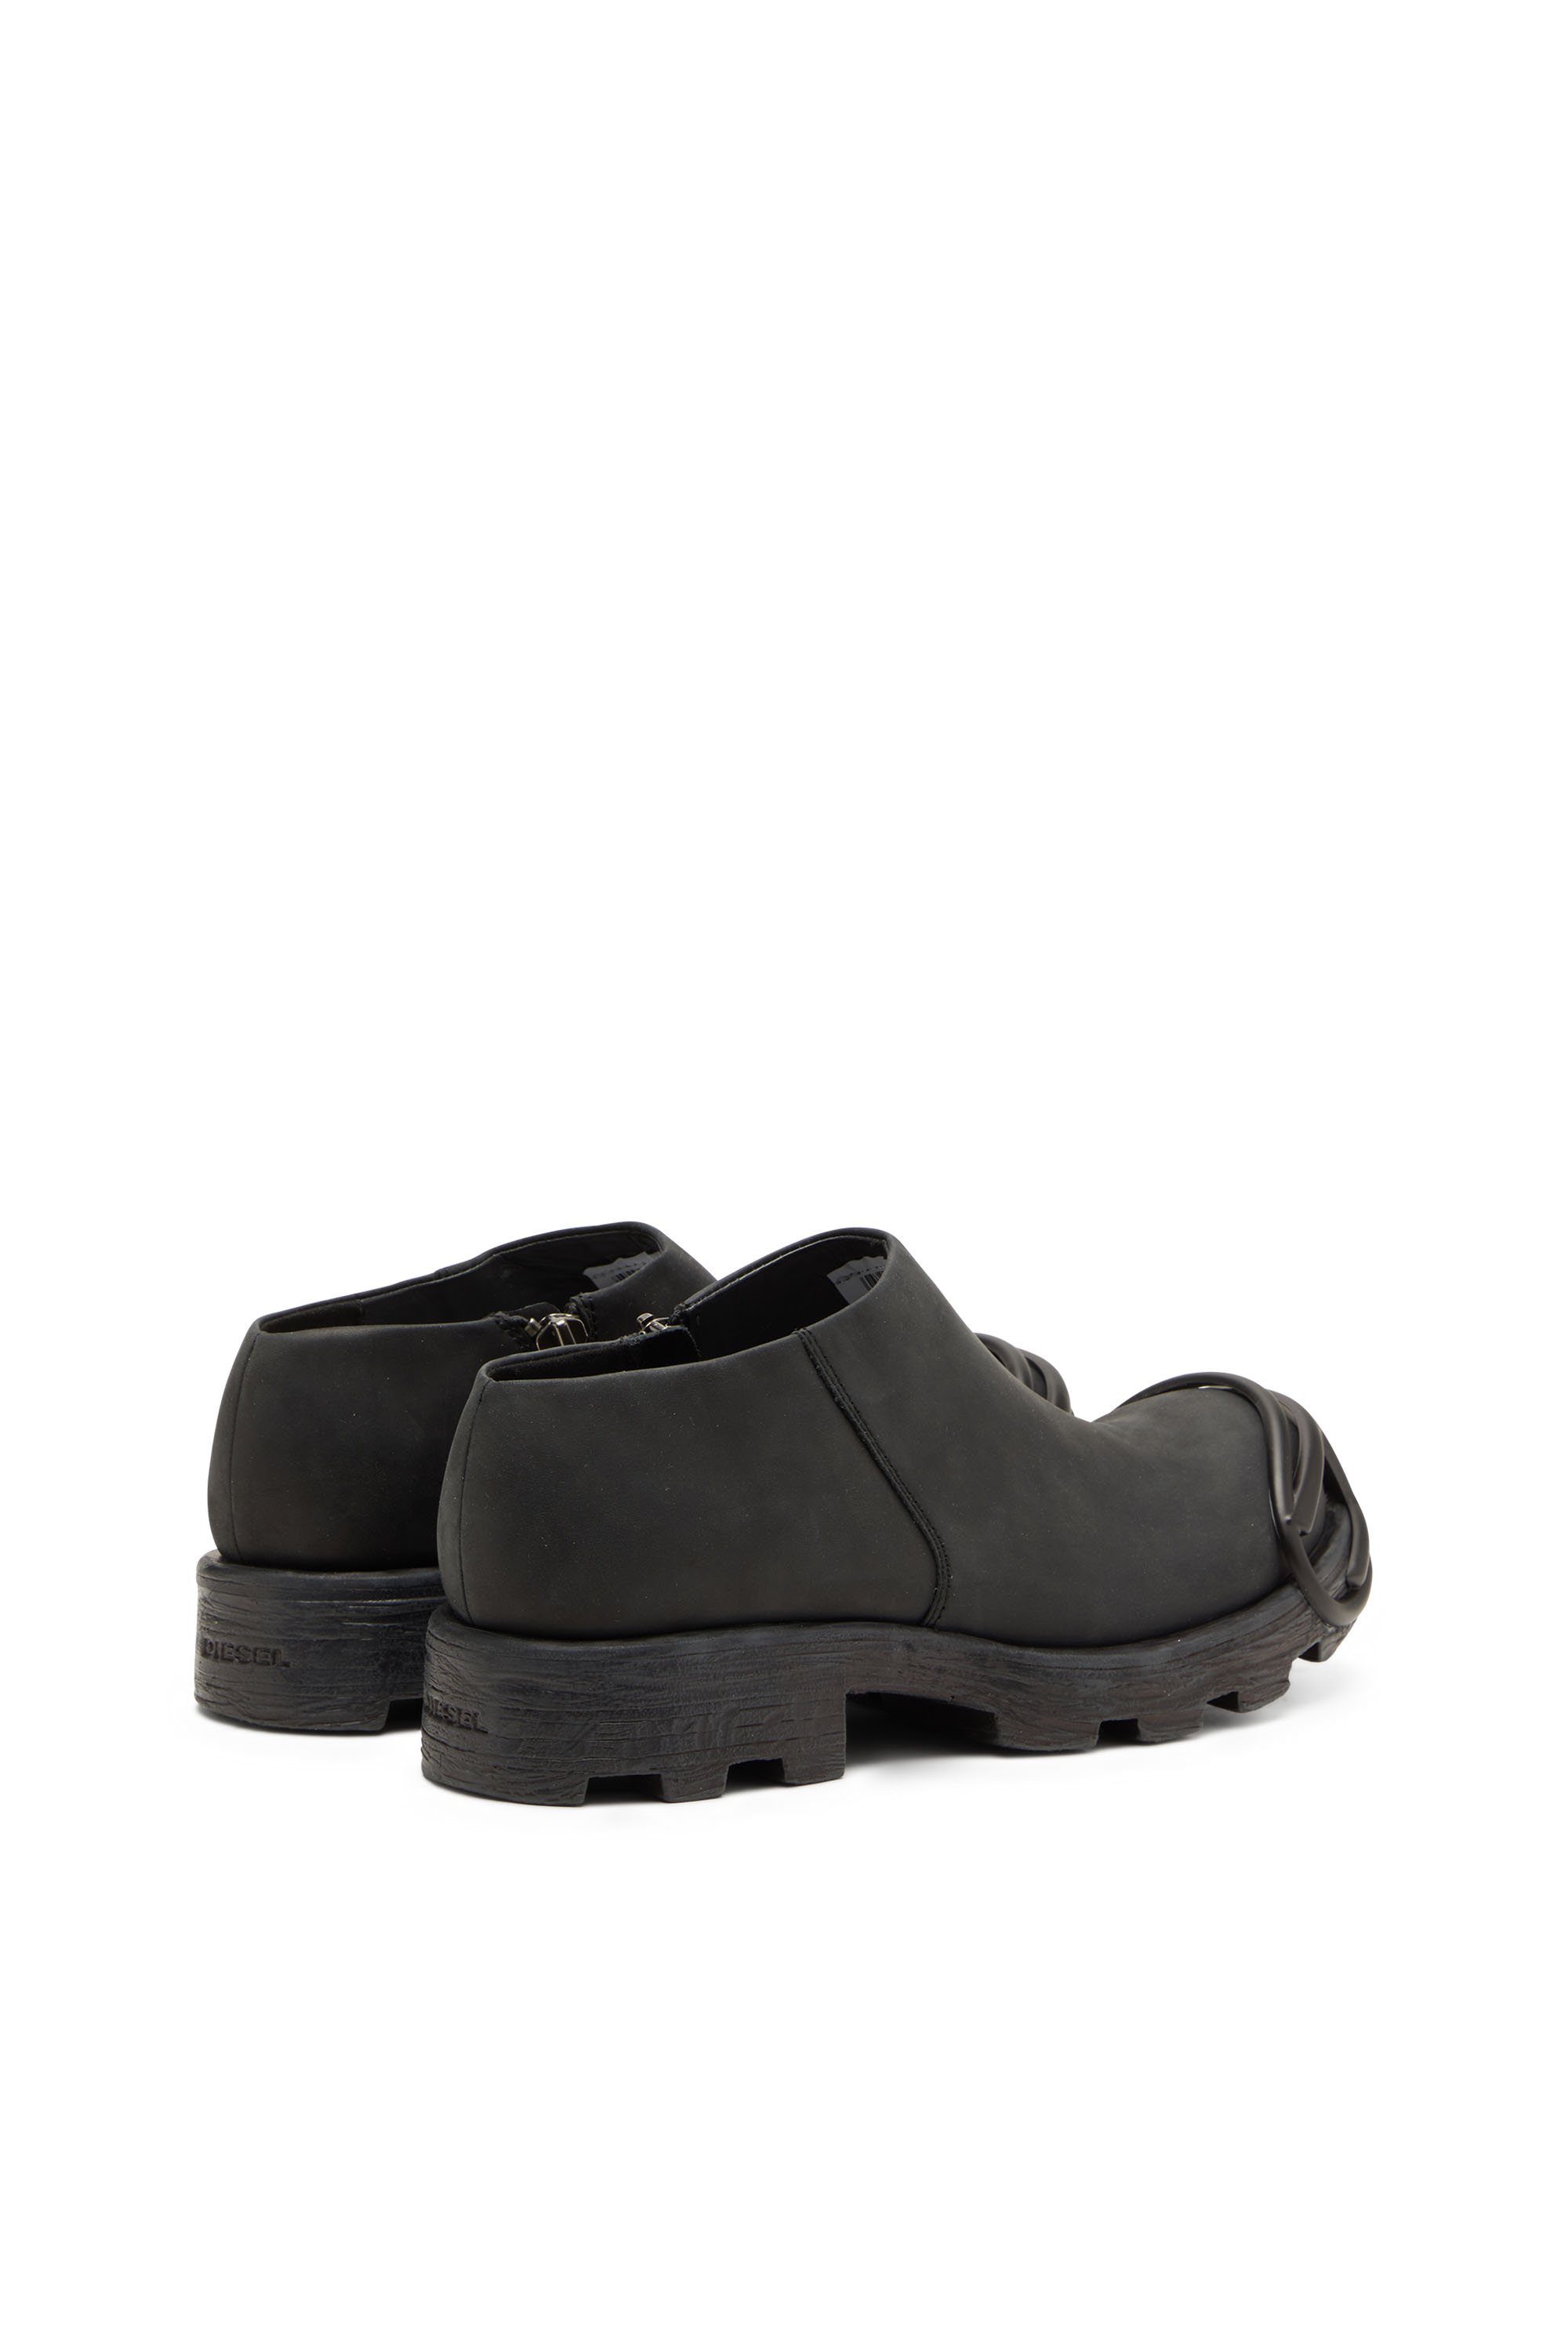 Diesel - D-HAMMER AB D, Male D-Hammer Ab D Boots - Low-cut boots with oval D toe guard in Black - Image 3